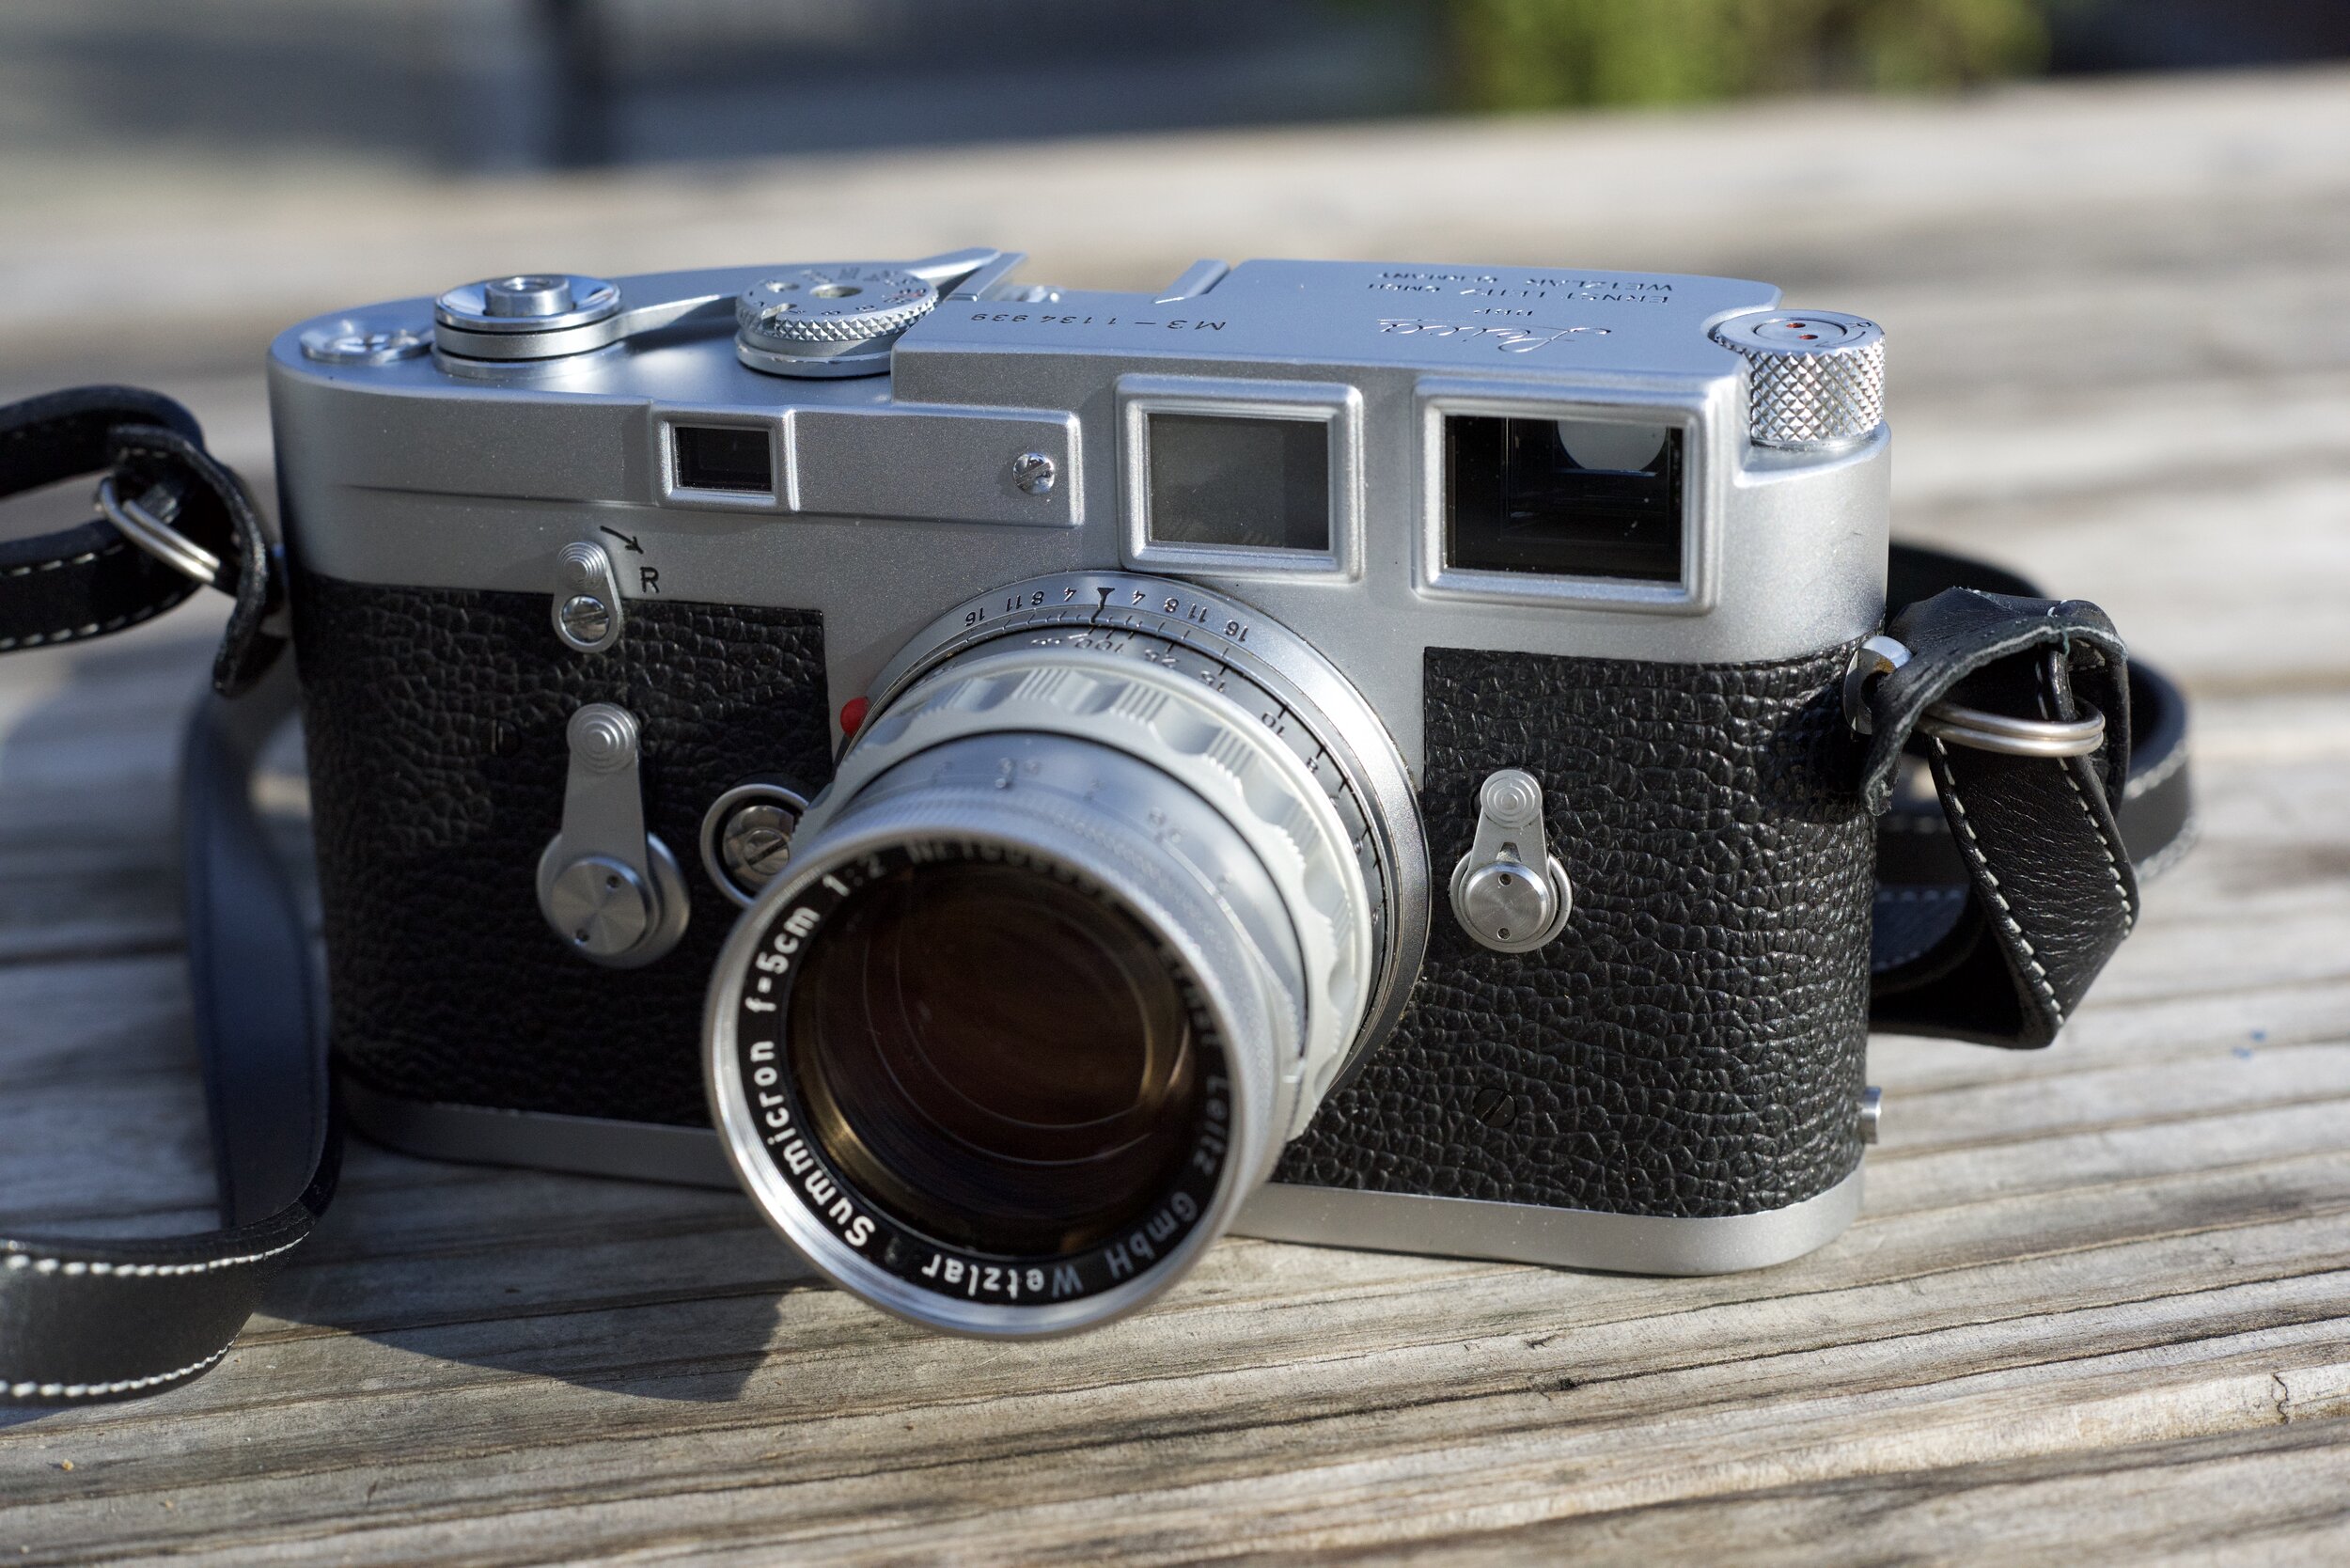 Four reasons to buy a Leica Rangefinder and two reasons not to